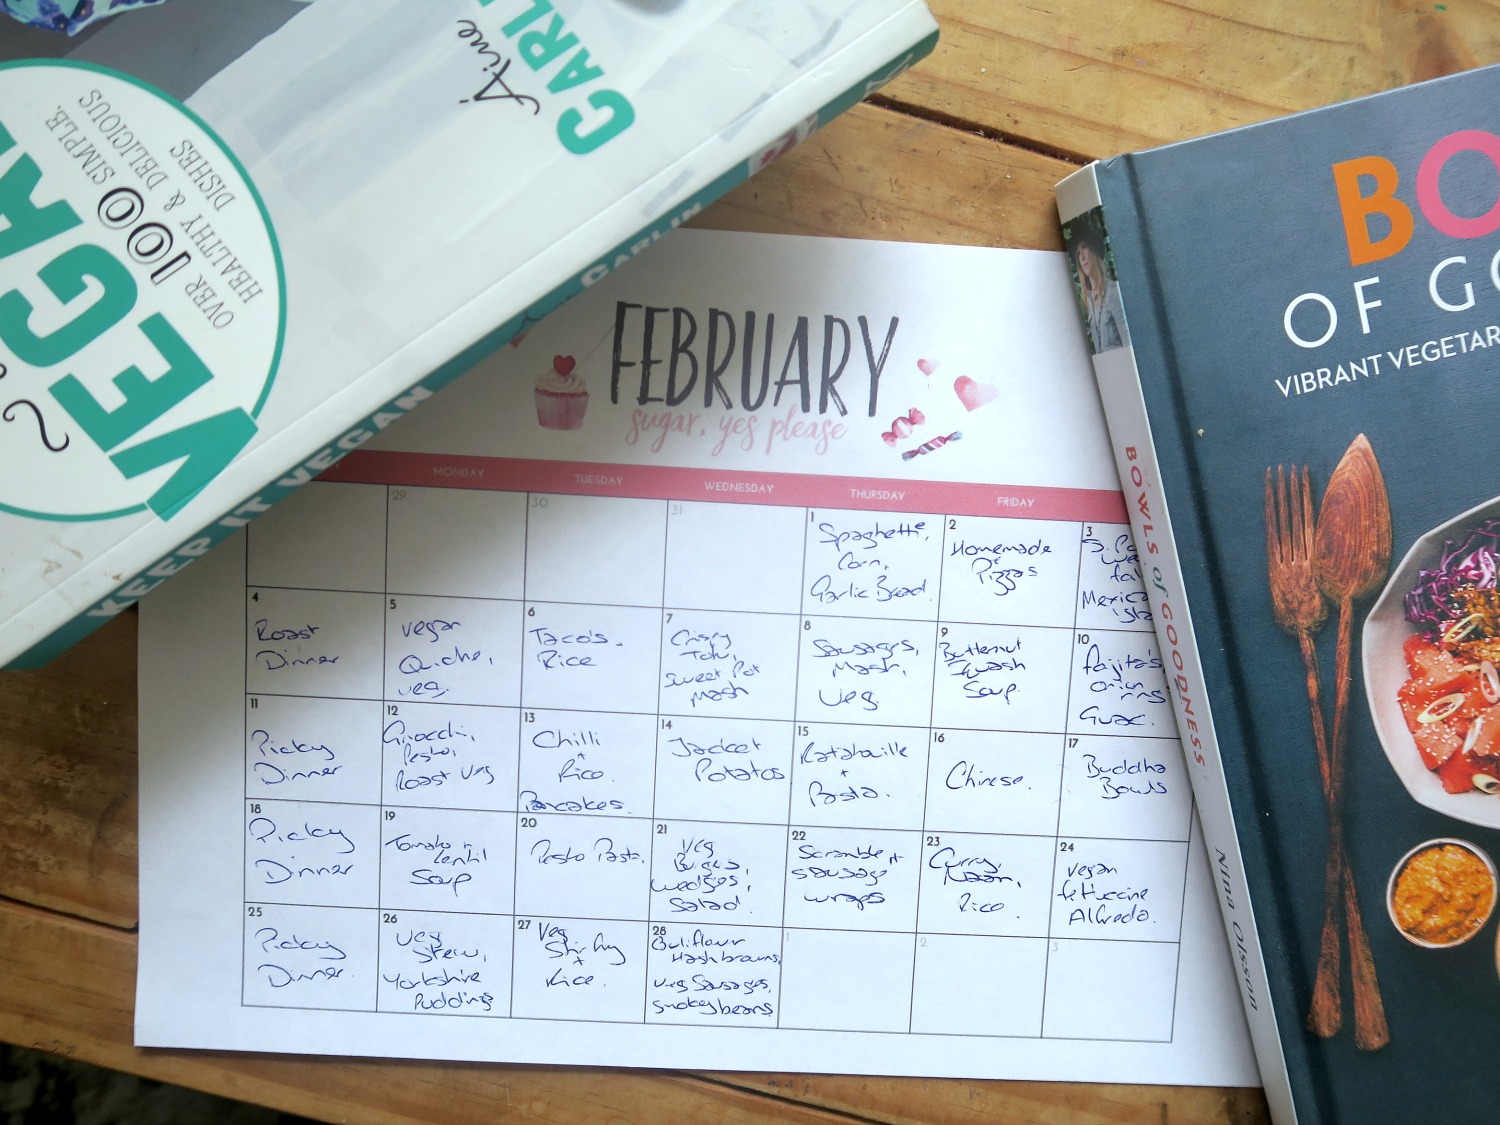 A family meal plan for February